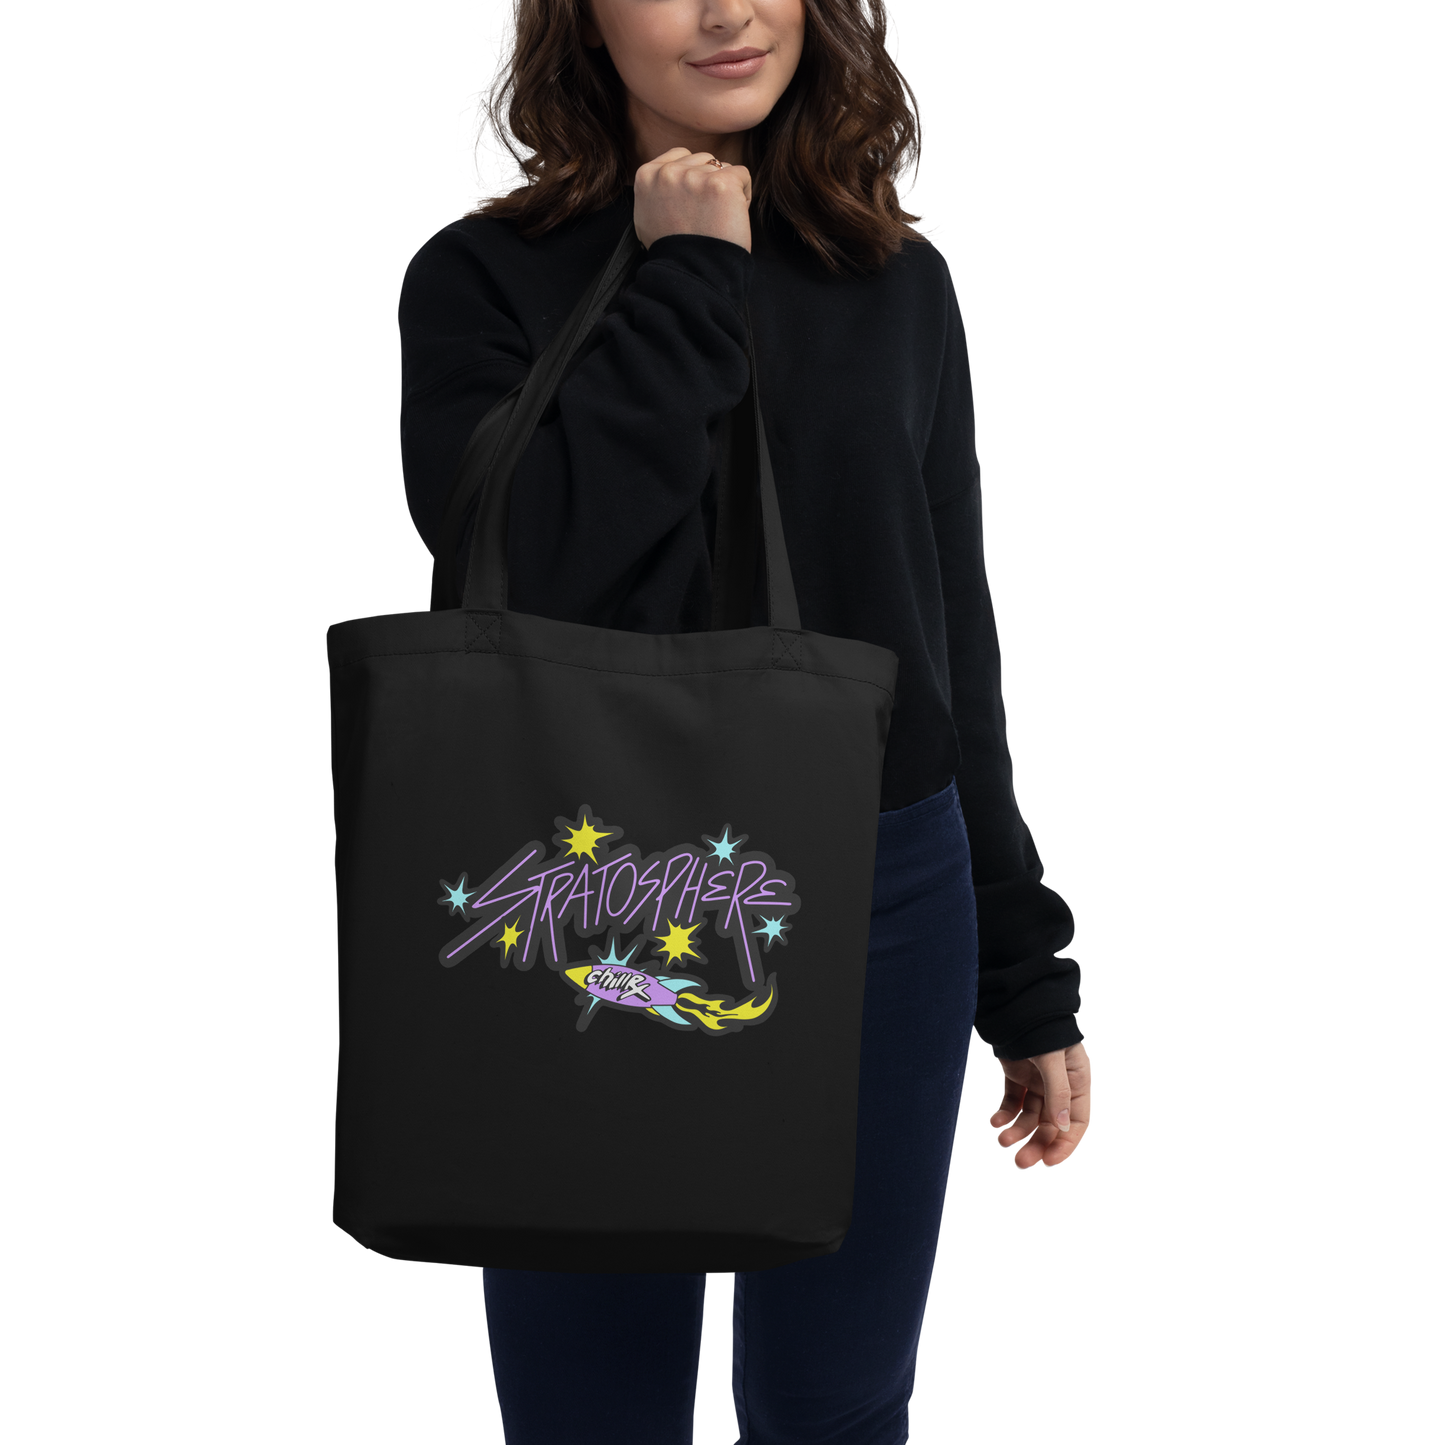 Decentralized Living Album "Stratosphere" Limited Edition Tote Bag